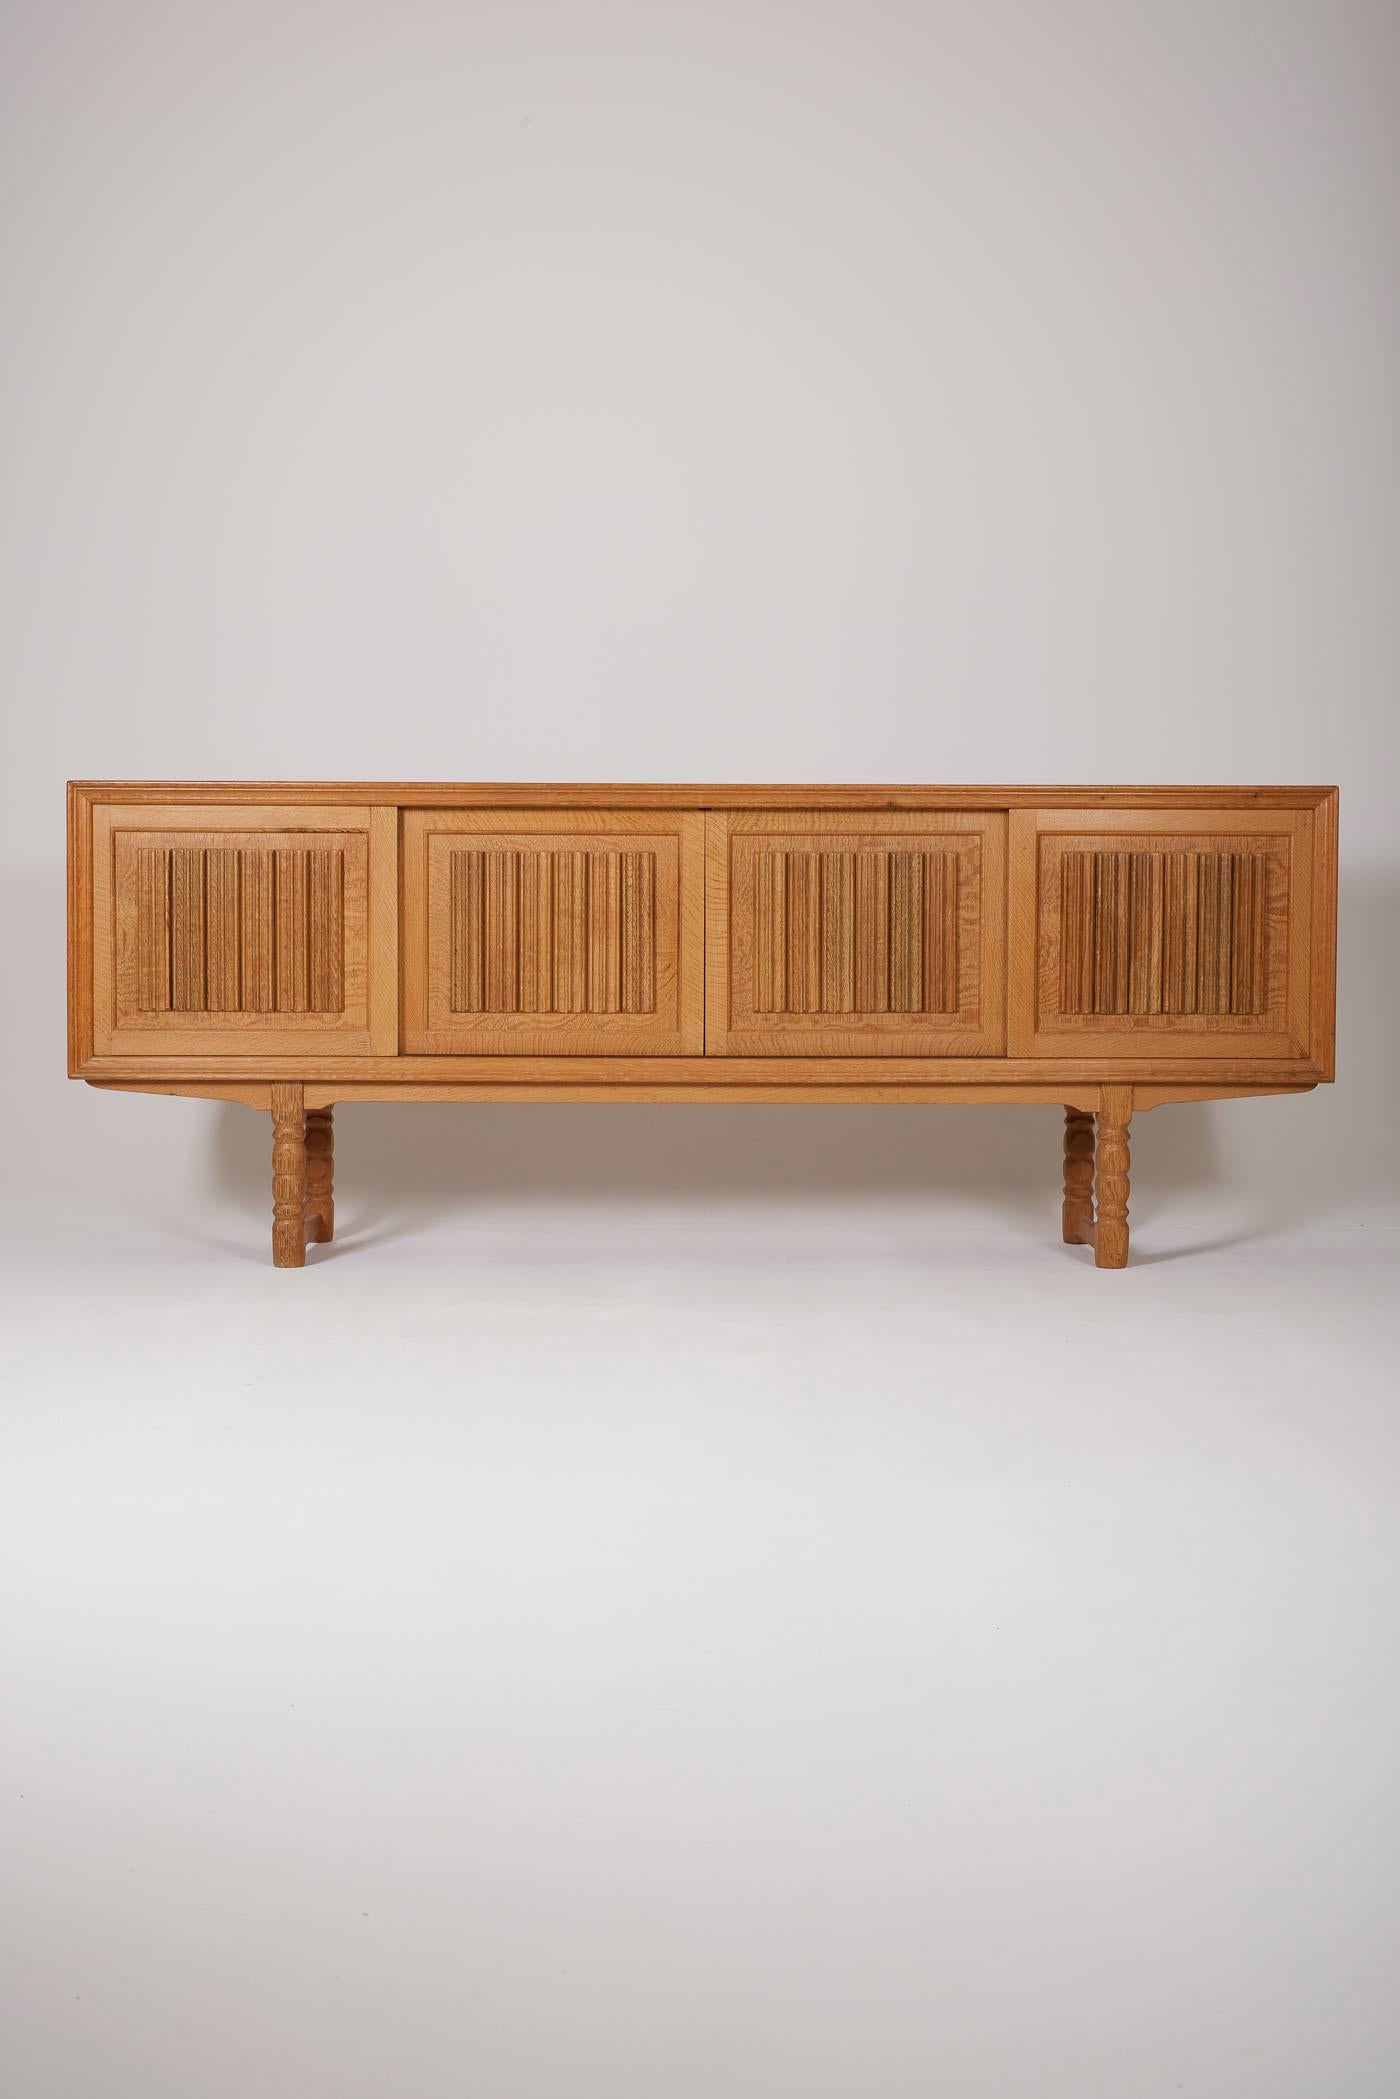 Danish solid wood sideboard with turned wooden legs, from the 1960s. Sideboard with 4 sliding doors. In perfect condition.
DV302